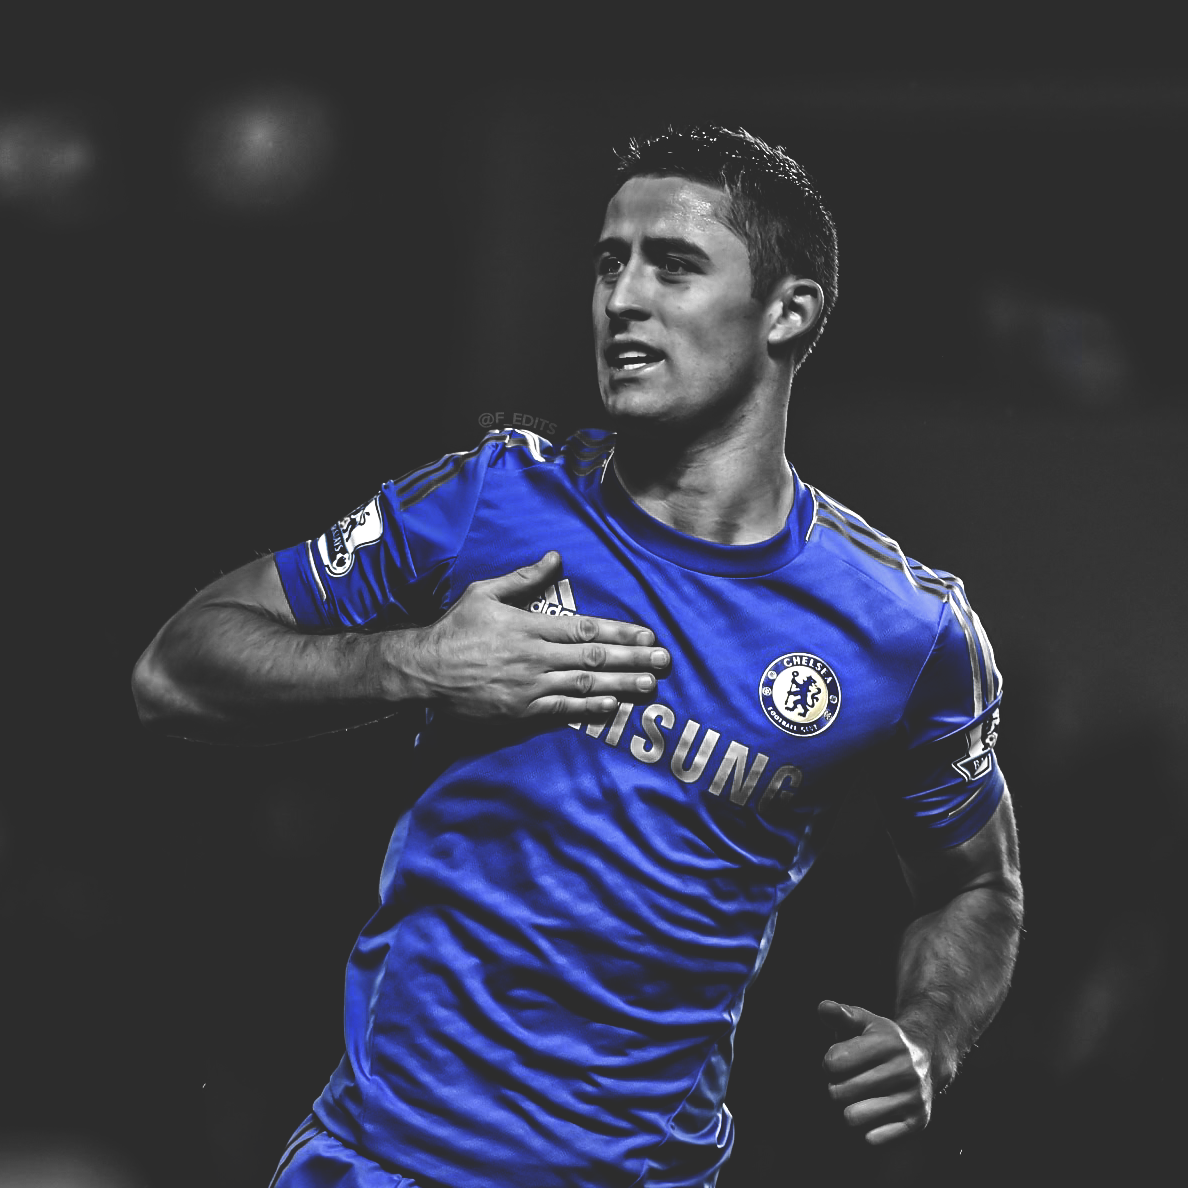 Fredrik On Gary Cahill Cfc iPhone Wallpaper And Icon